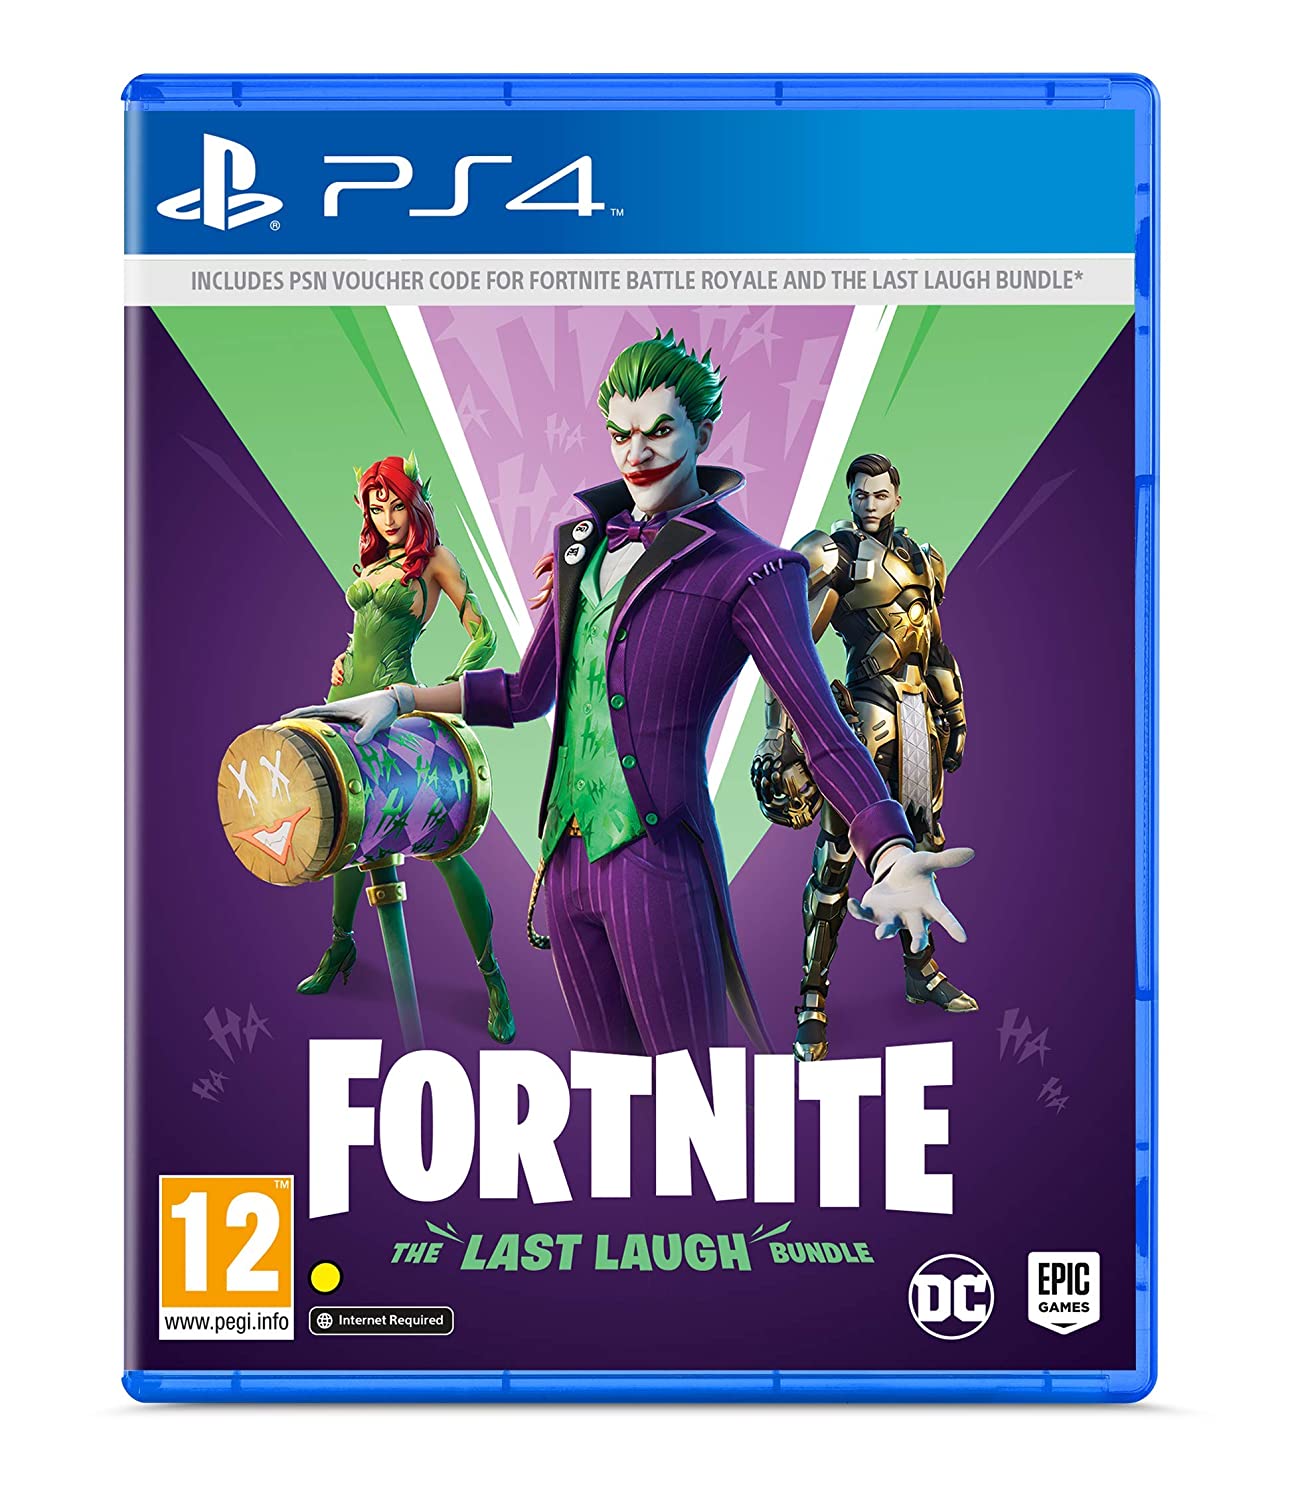 Fortnite Free Download For PC, PS4 & Xbox